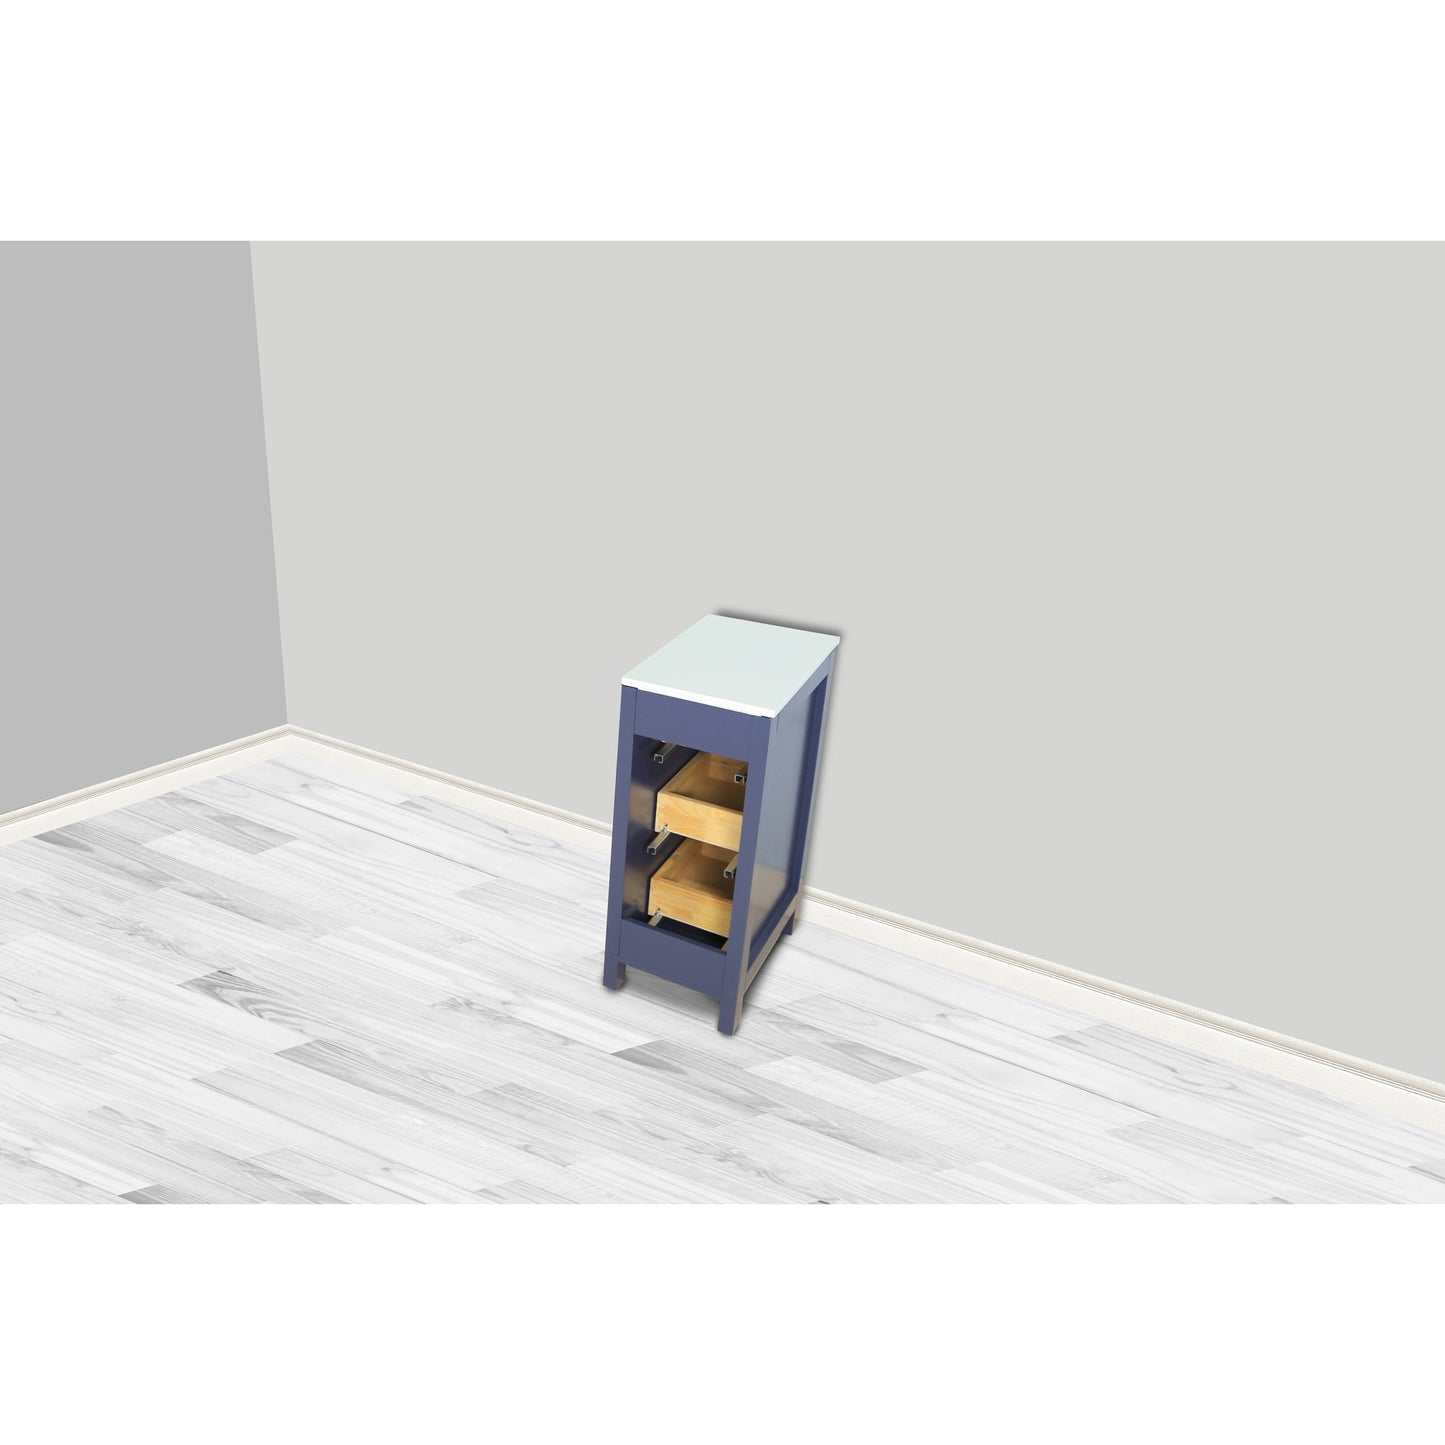 Vanity Art VA3012 12" Blue Freestanding Oak Vanity Cabinet With Stone Top and Soft Closing Drawers